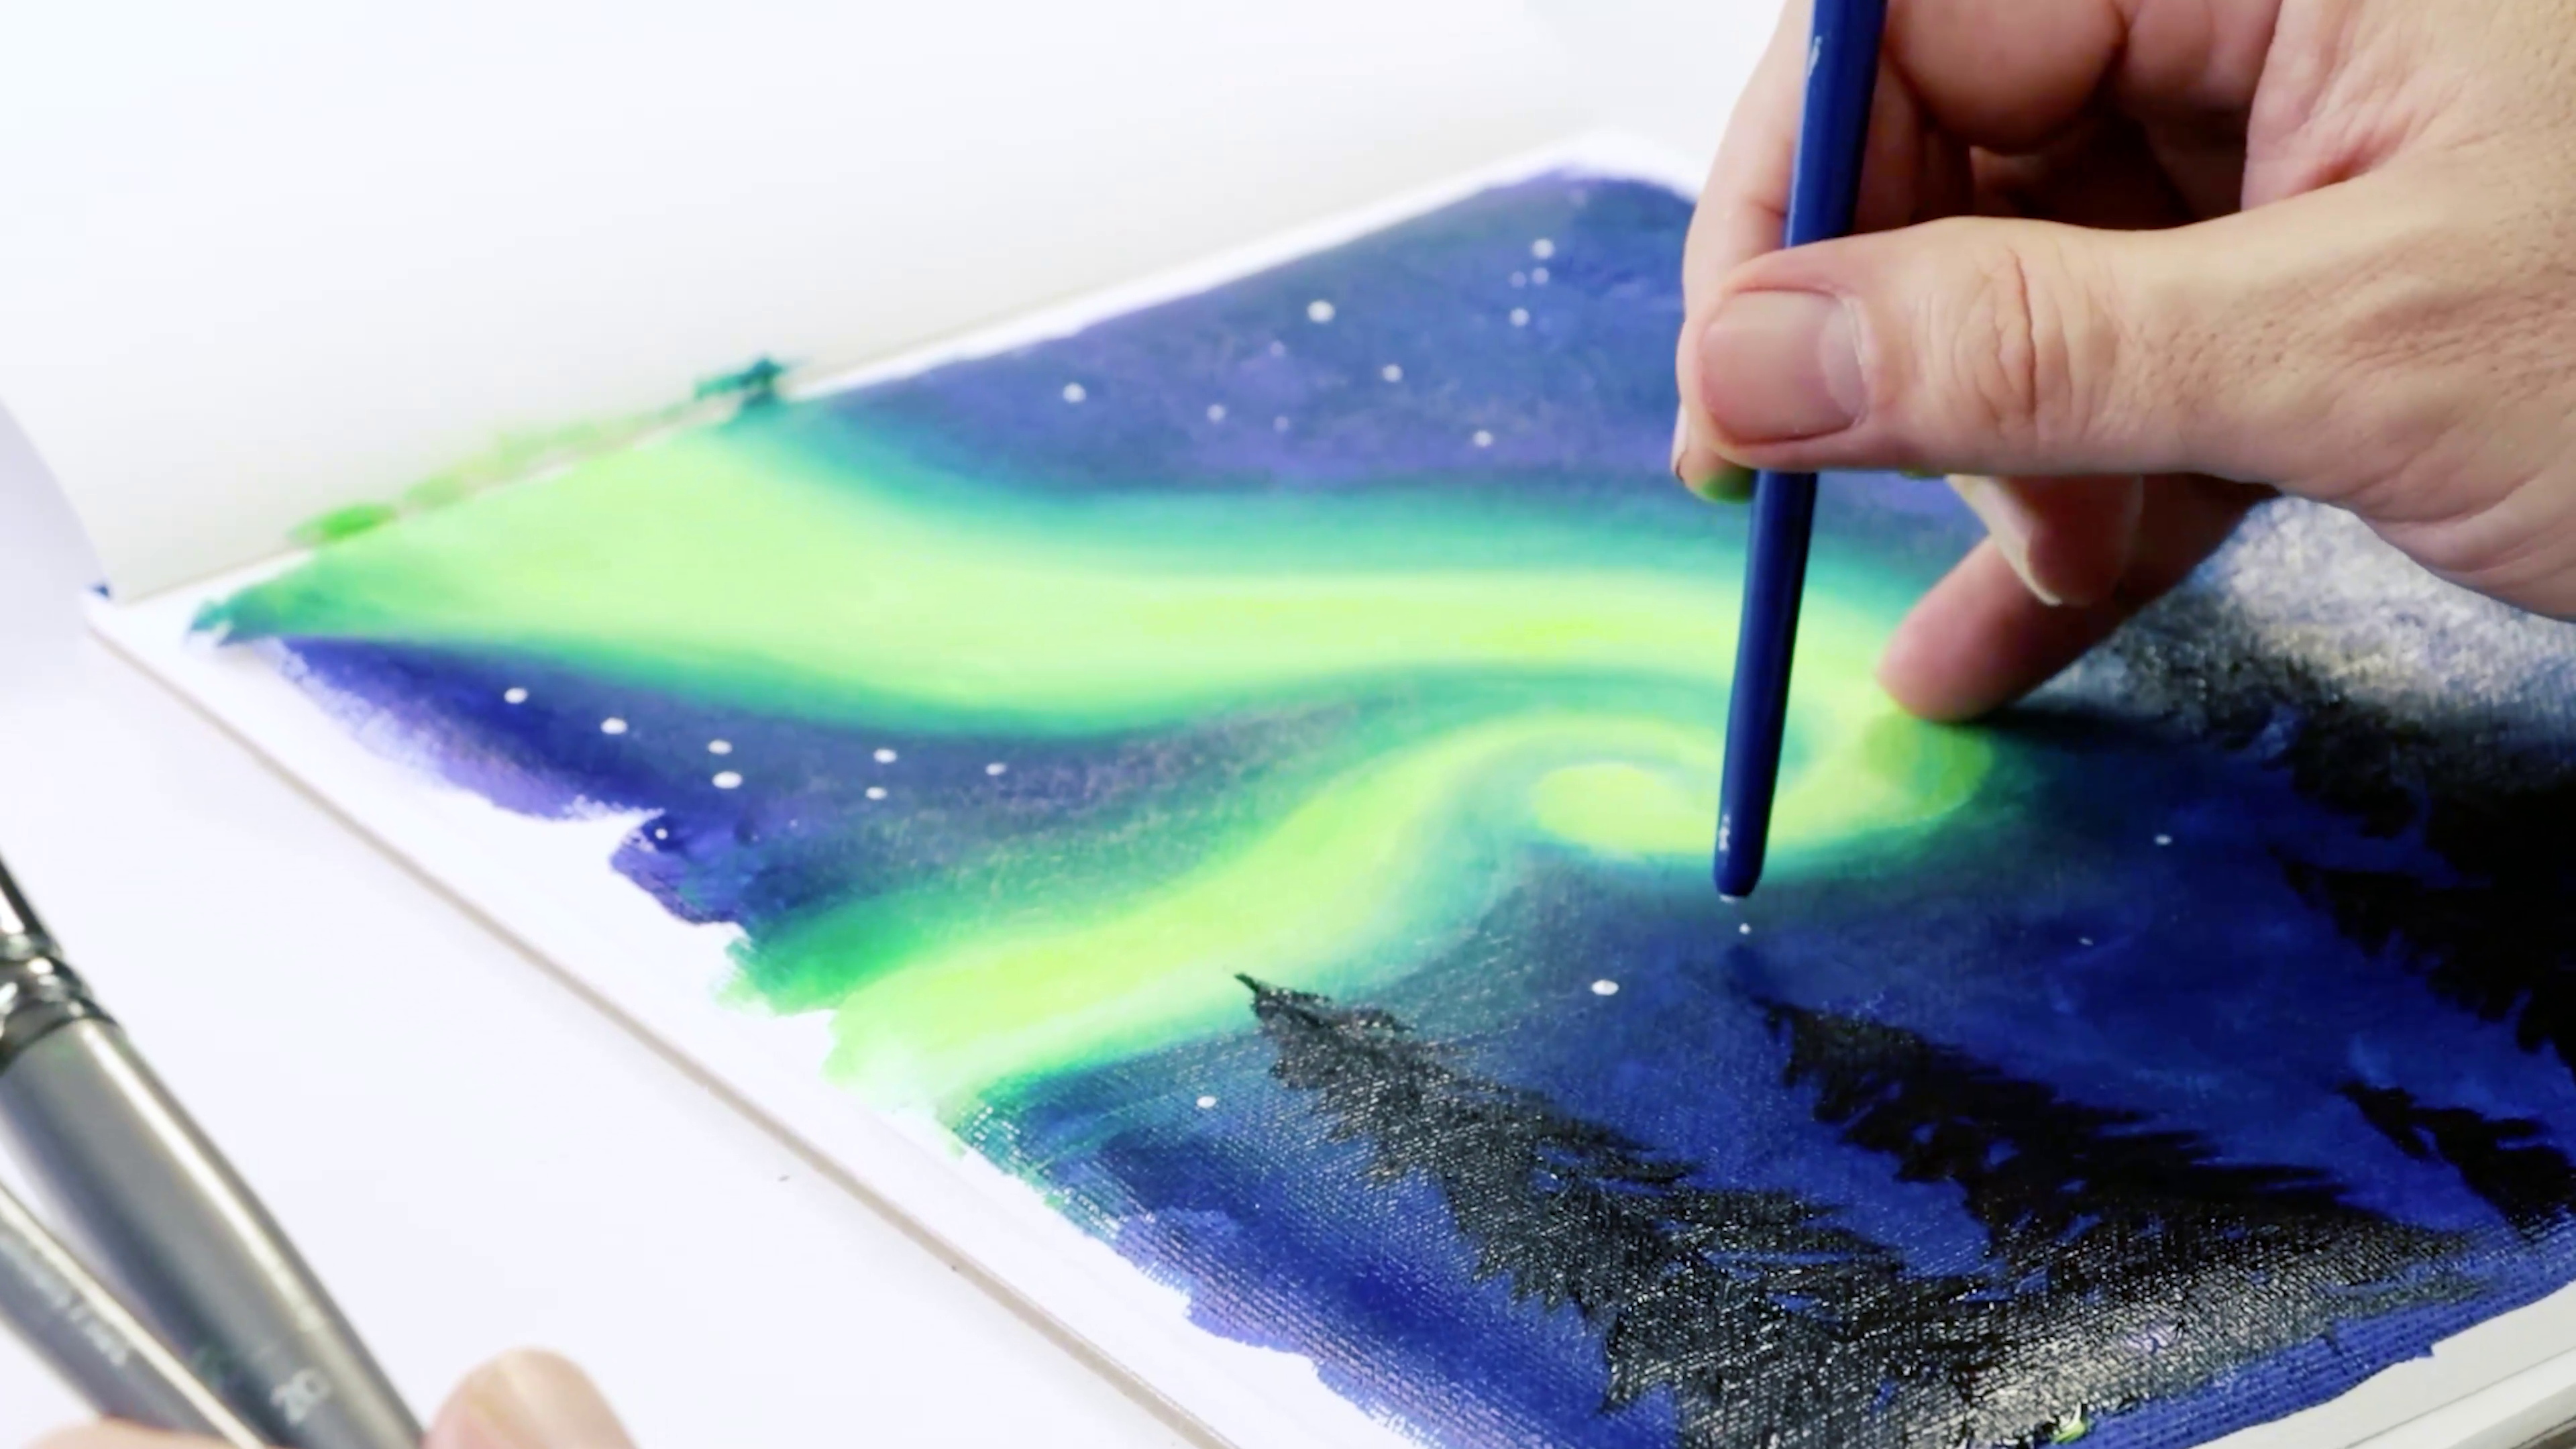 Northern lights painting on a Canvas Pad